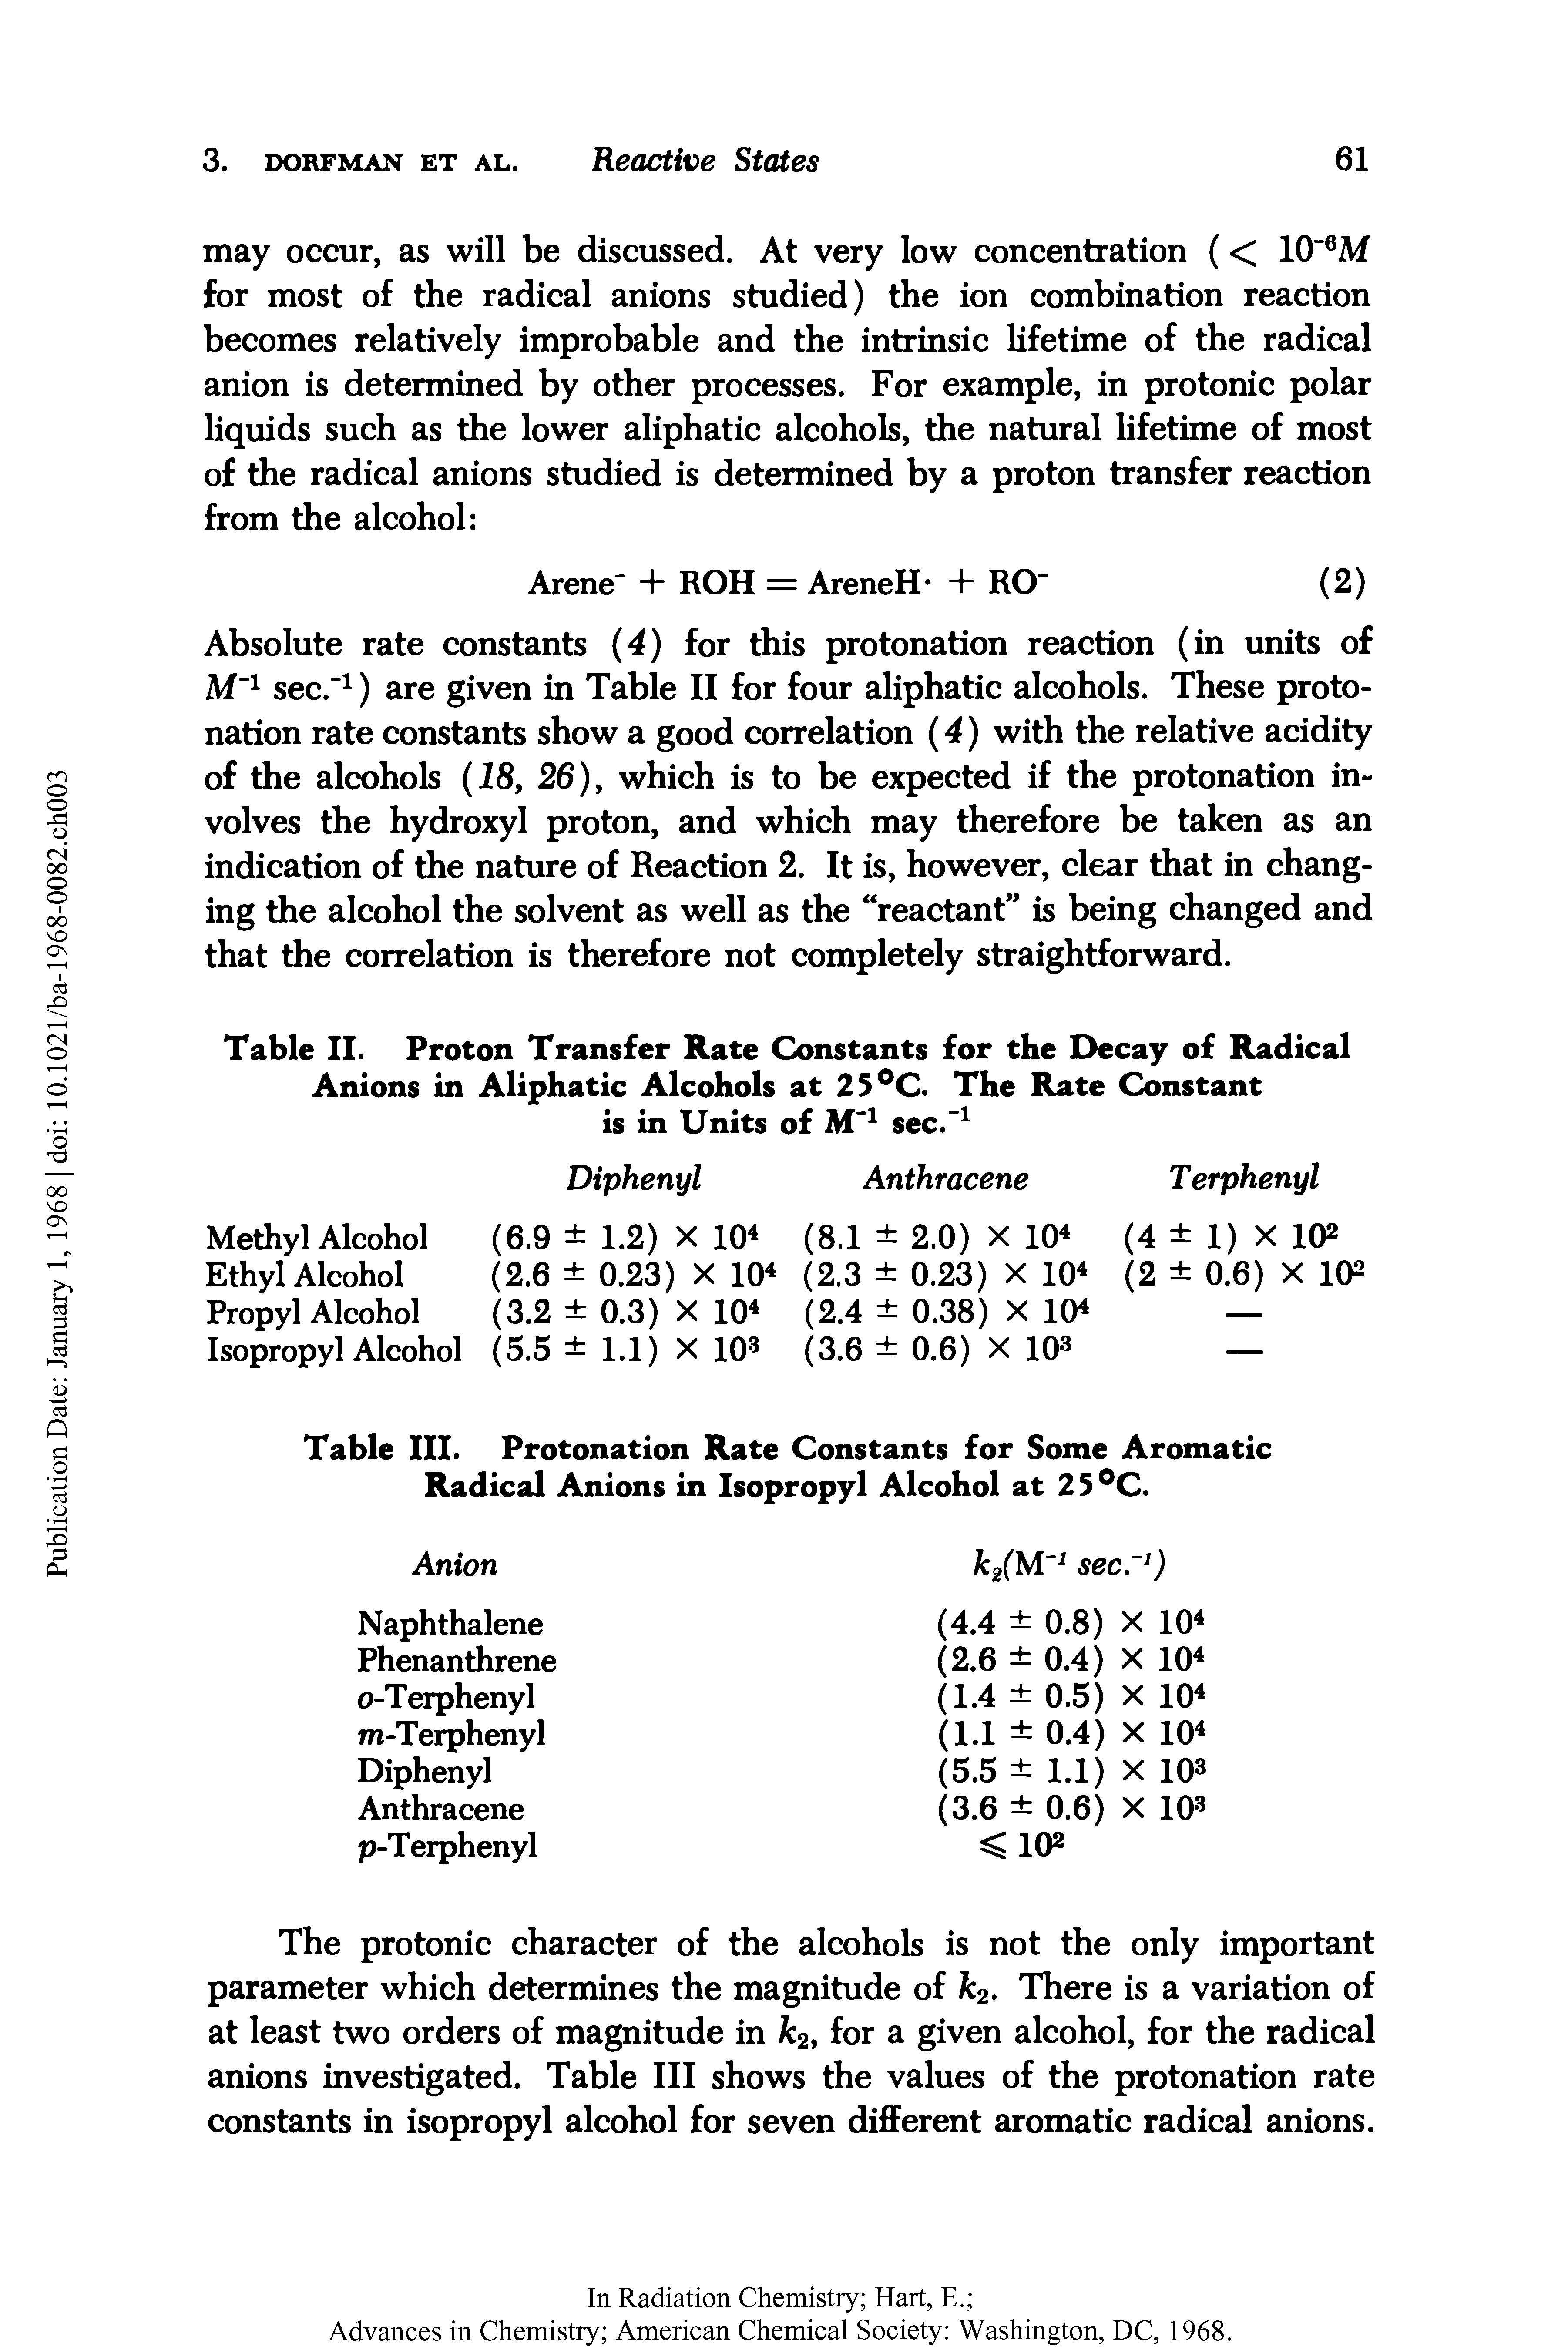 Table III. Protonation Rate Constants for Some Aromatic Radical Anions in Isopropyl Alcohol at 25°C.